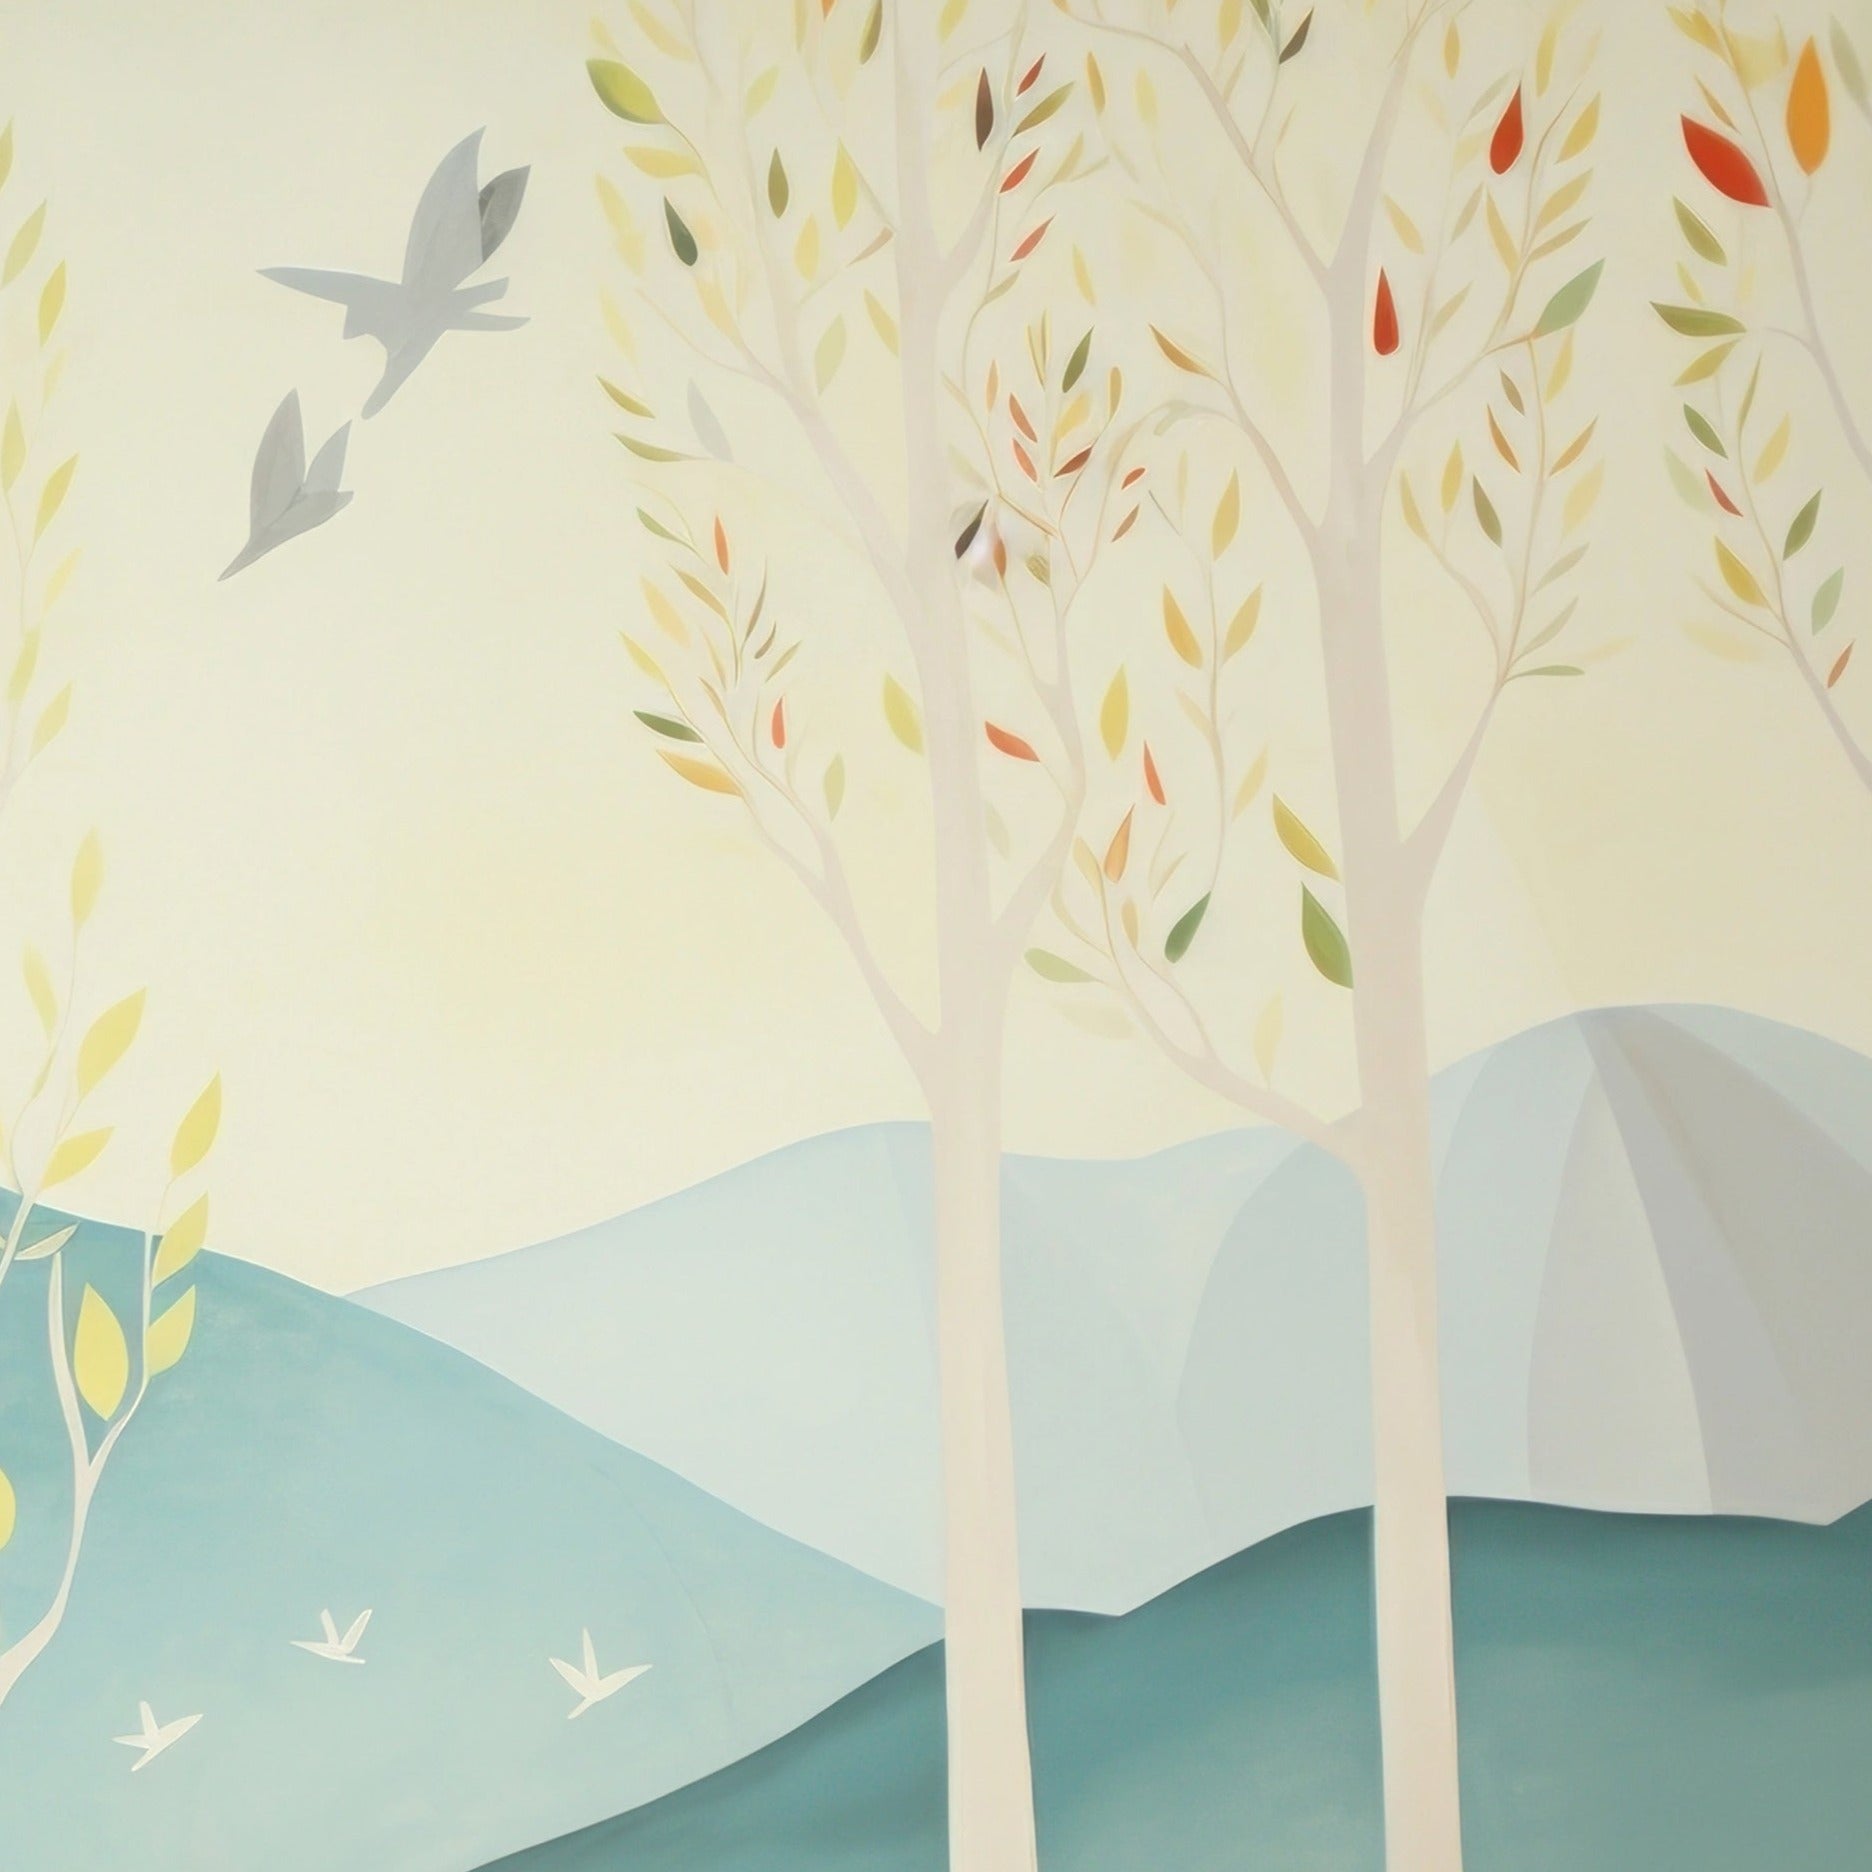 "Tranquil mountain scene mural, perfect for creating a peaceful environment in any room."